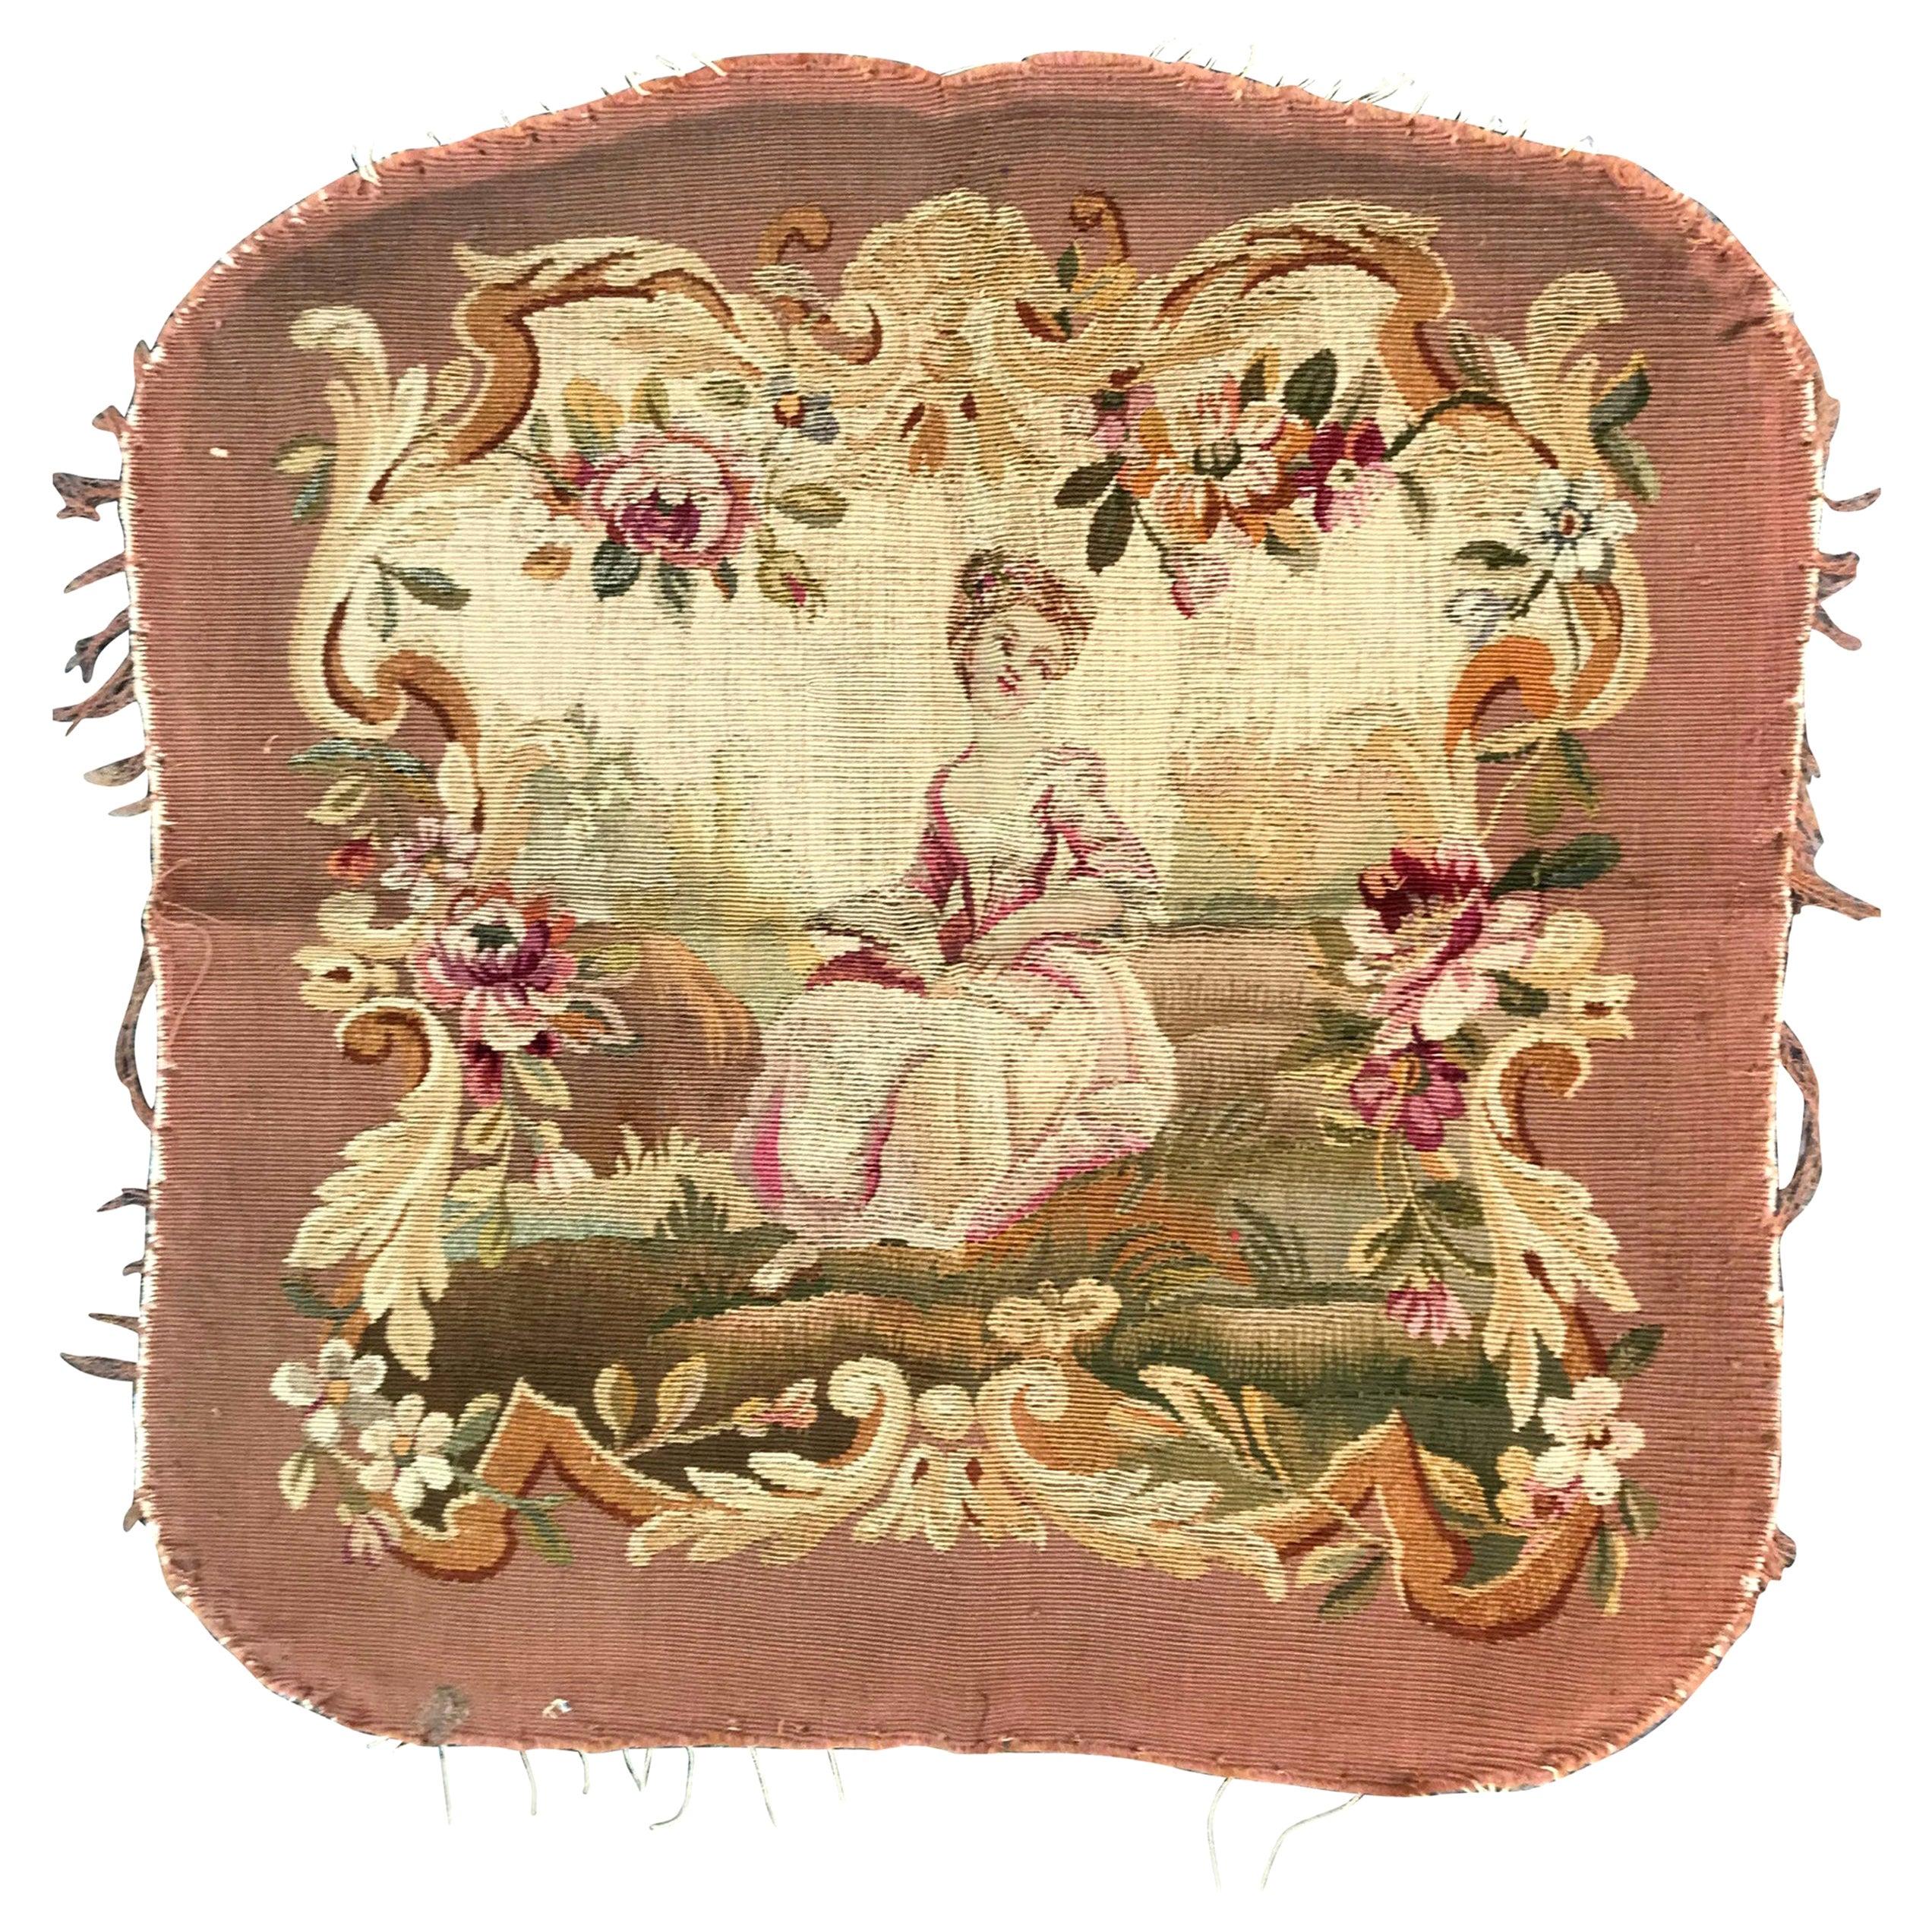 Bobyrug’s Antique Aubusson Cushion Chair Cover Tapestry For Sale